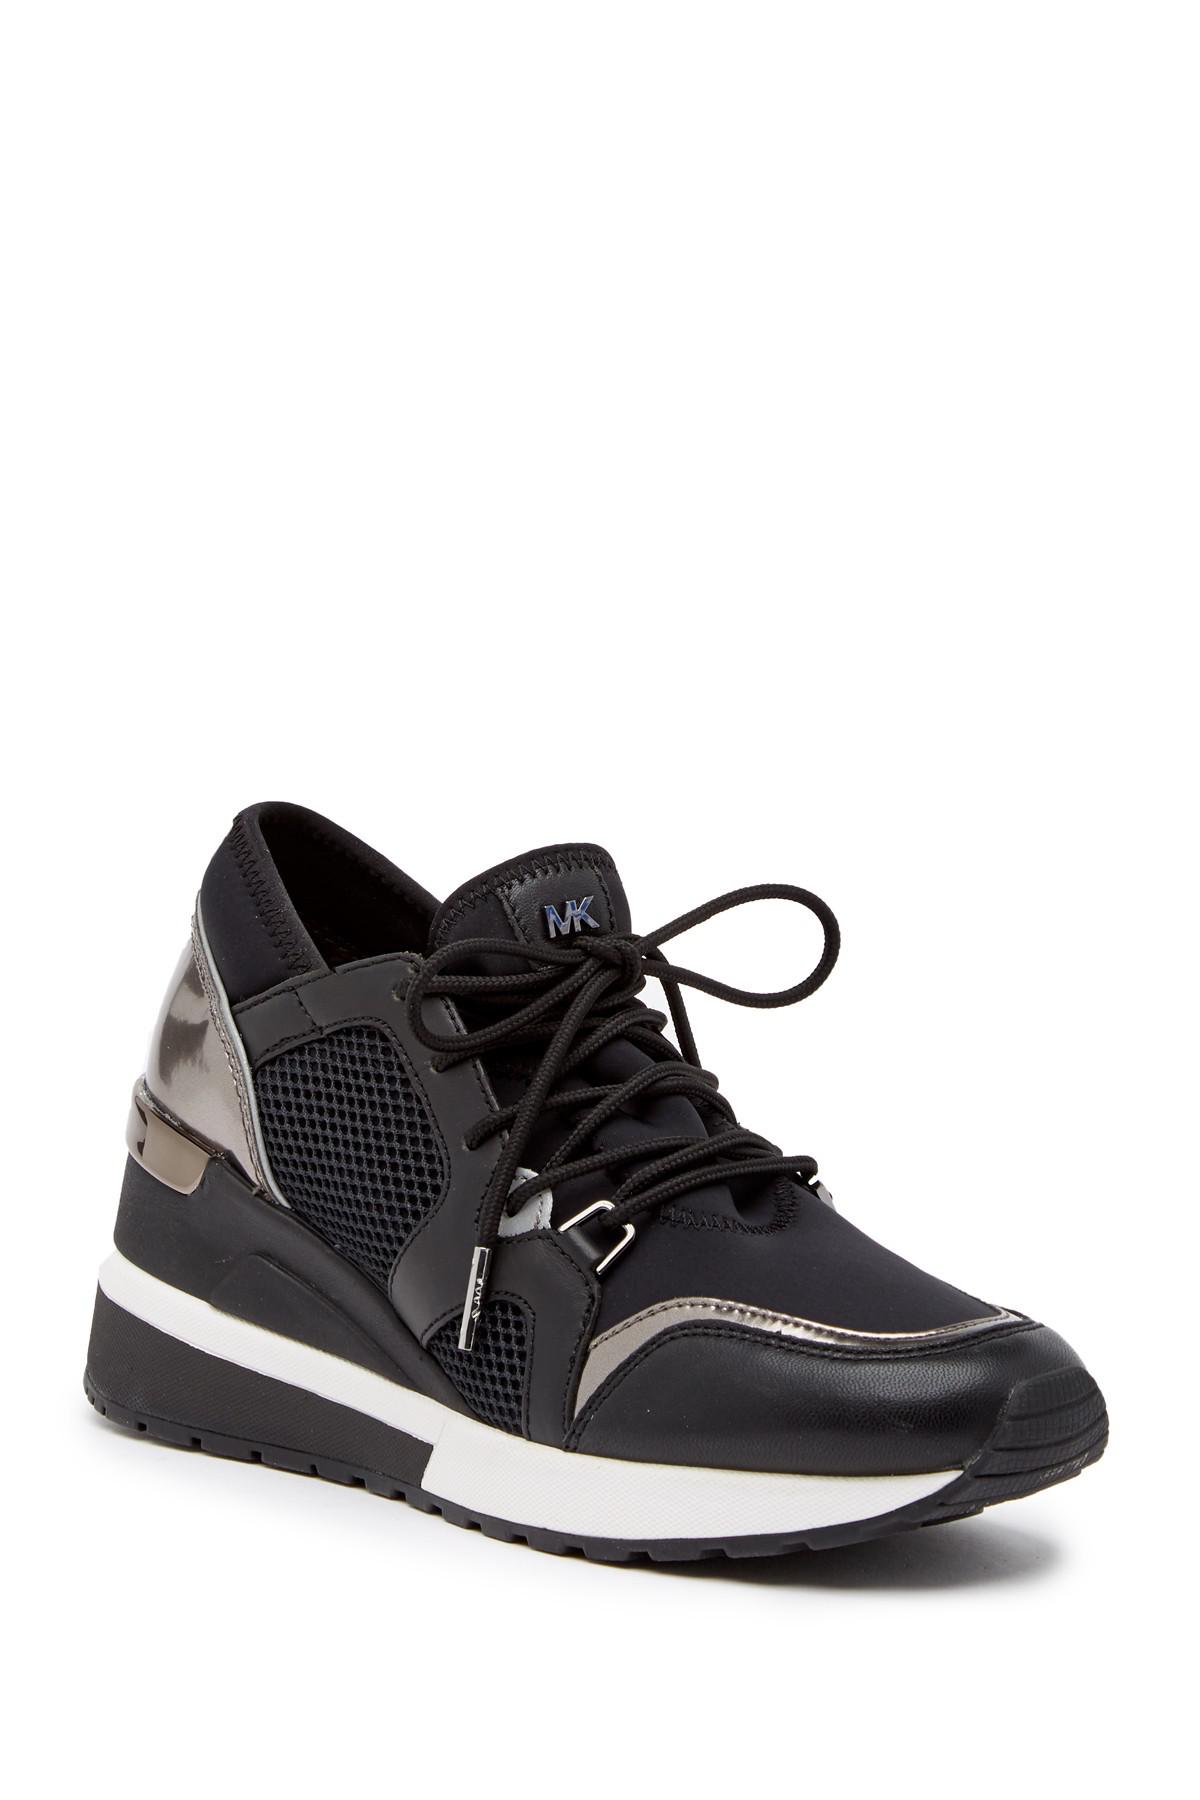 MICHAEL Michael Kors Leather Scout Trainer Wedge Sneaker in Black | Lyst